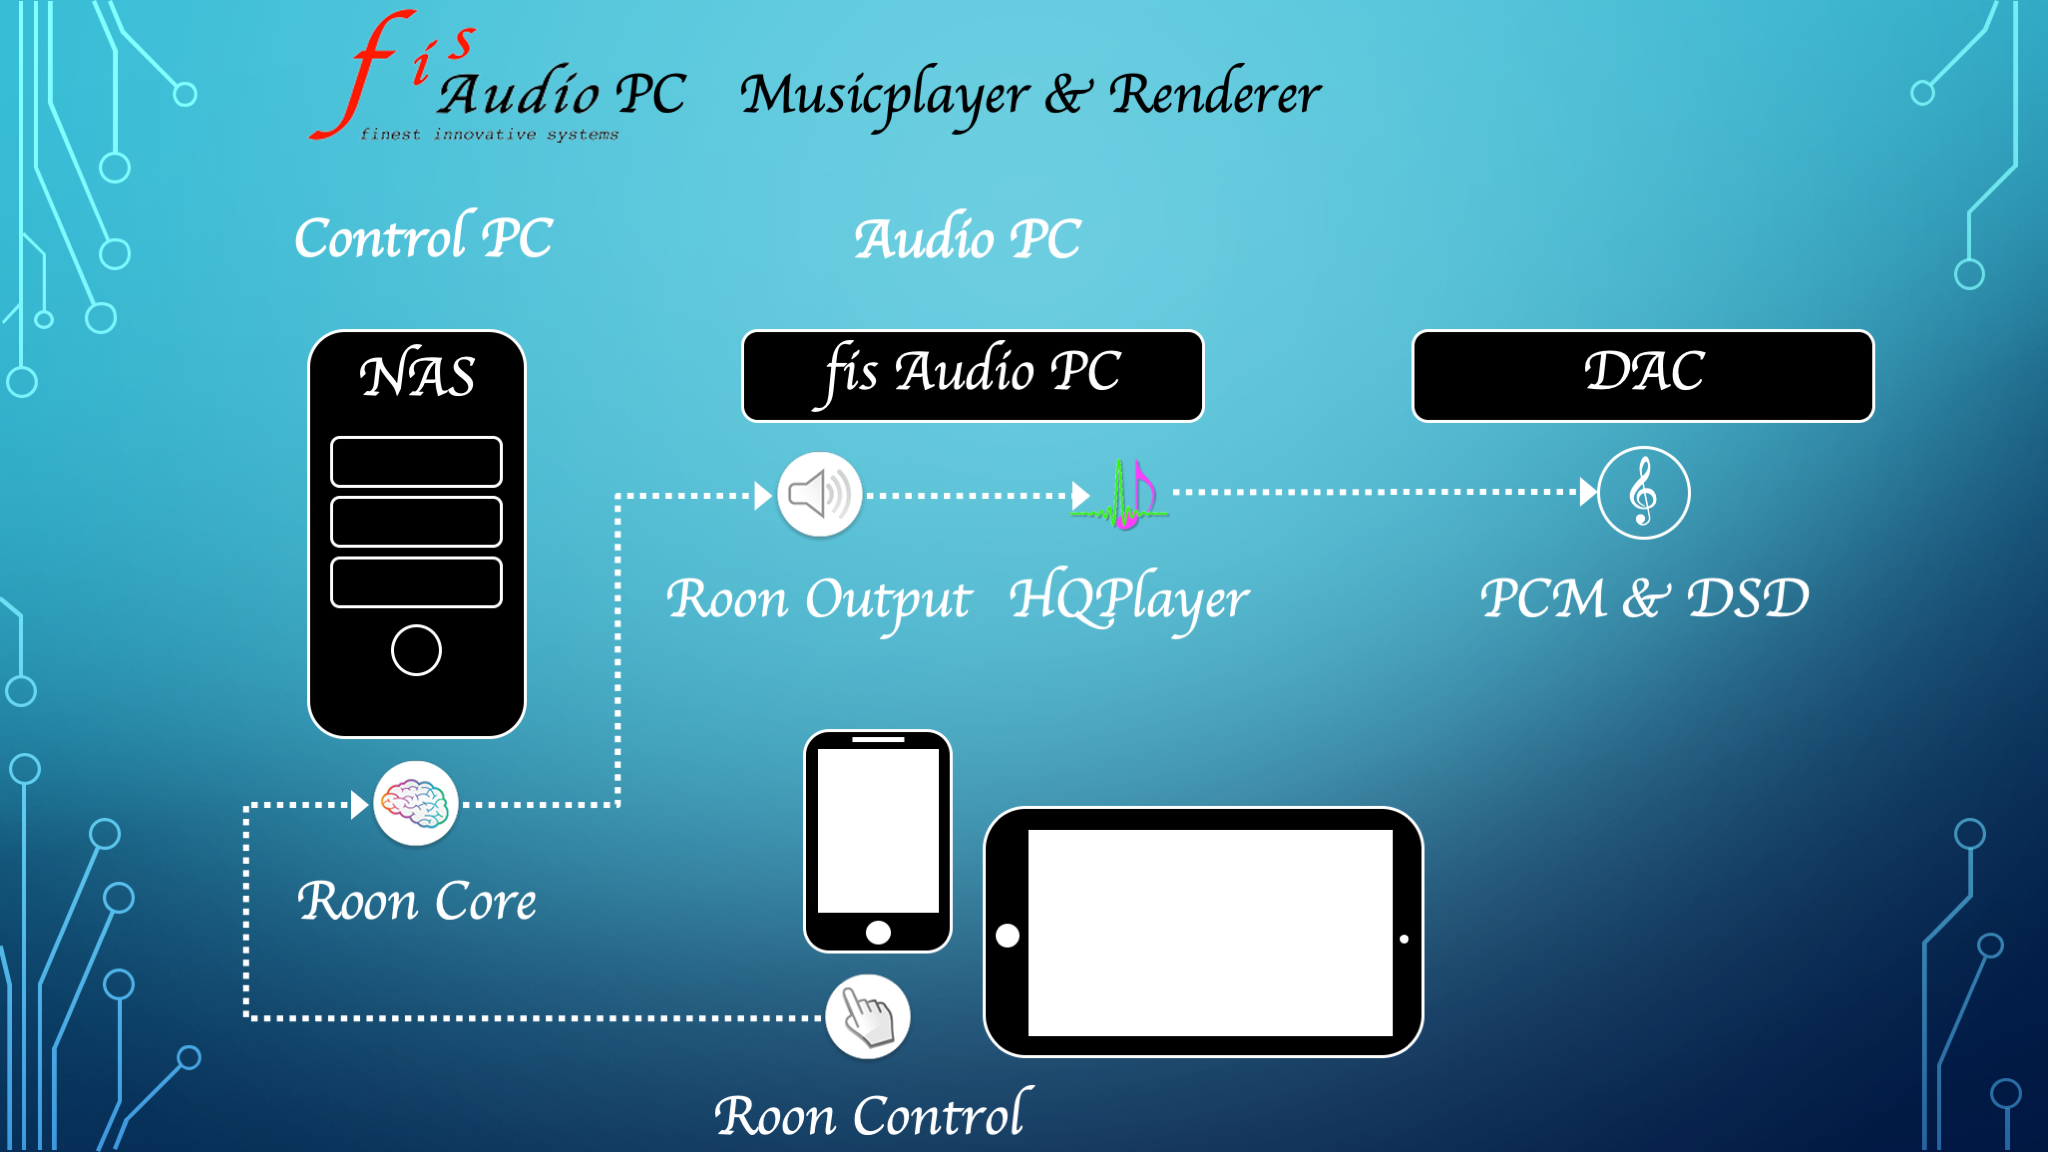 fis-Audio-PC-Musicplayer-Renderer.png